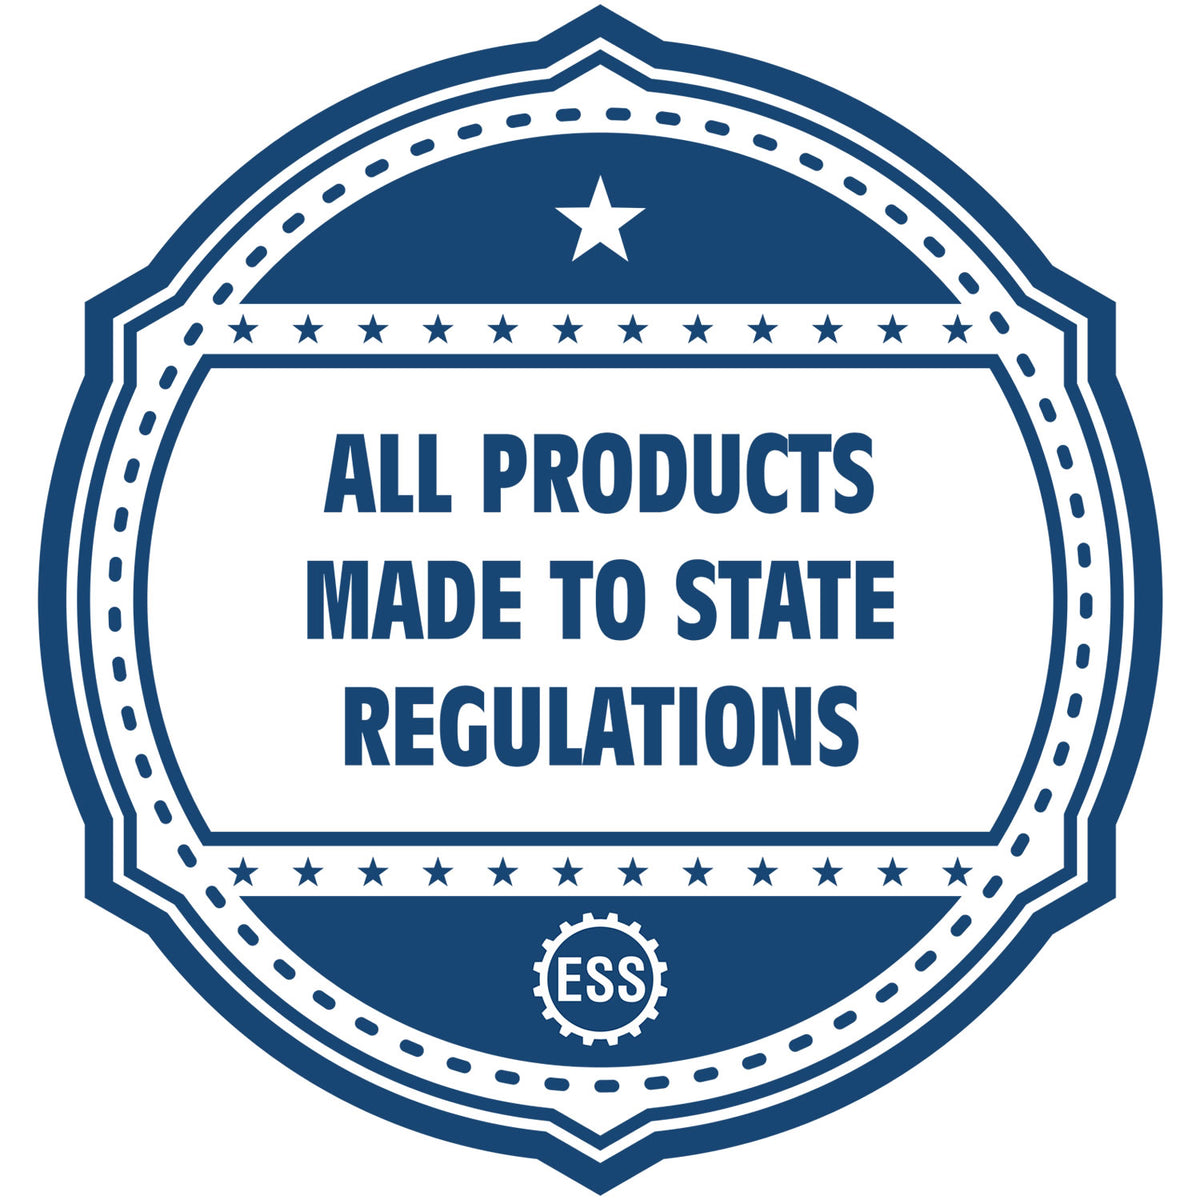 An icon or badge element for the Premium MaxLight Pre-Inked Oklahoma Landscape Architectural Stamp showing that this product is made in compliance with state regulations.